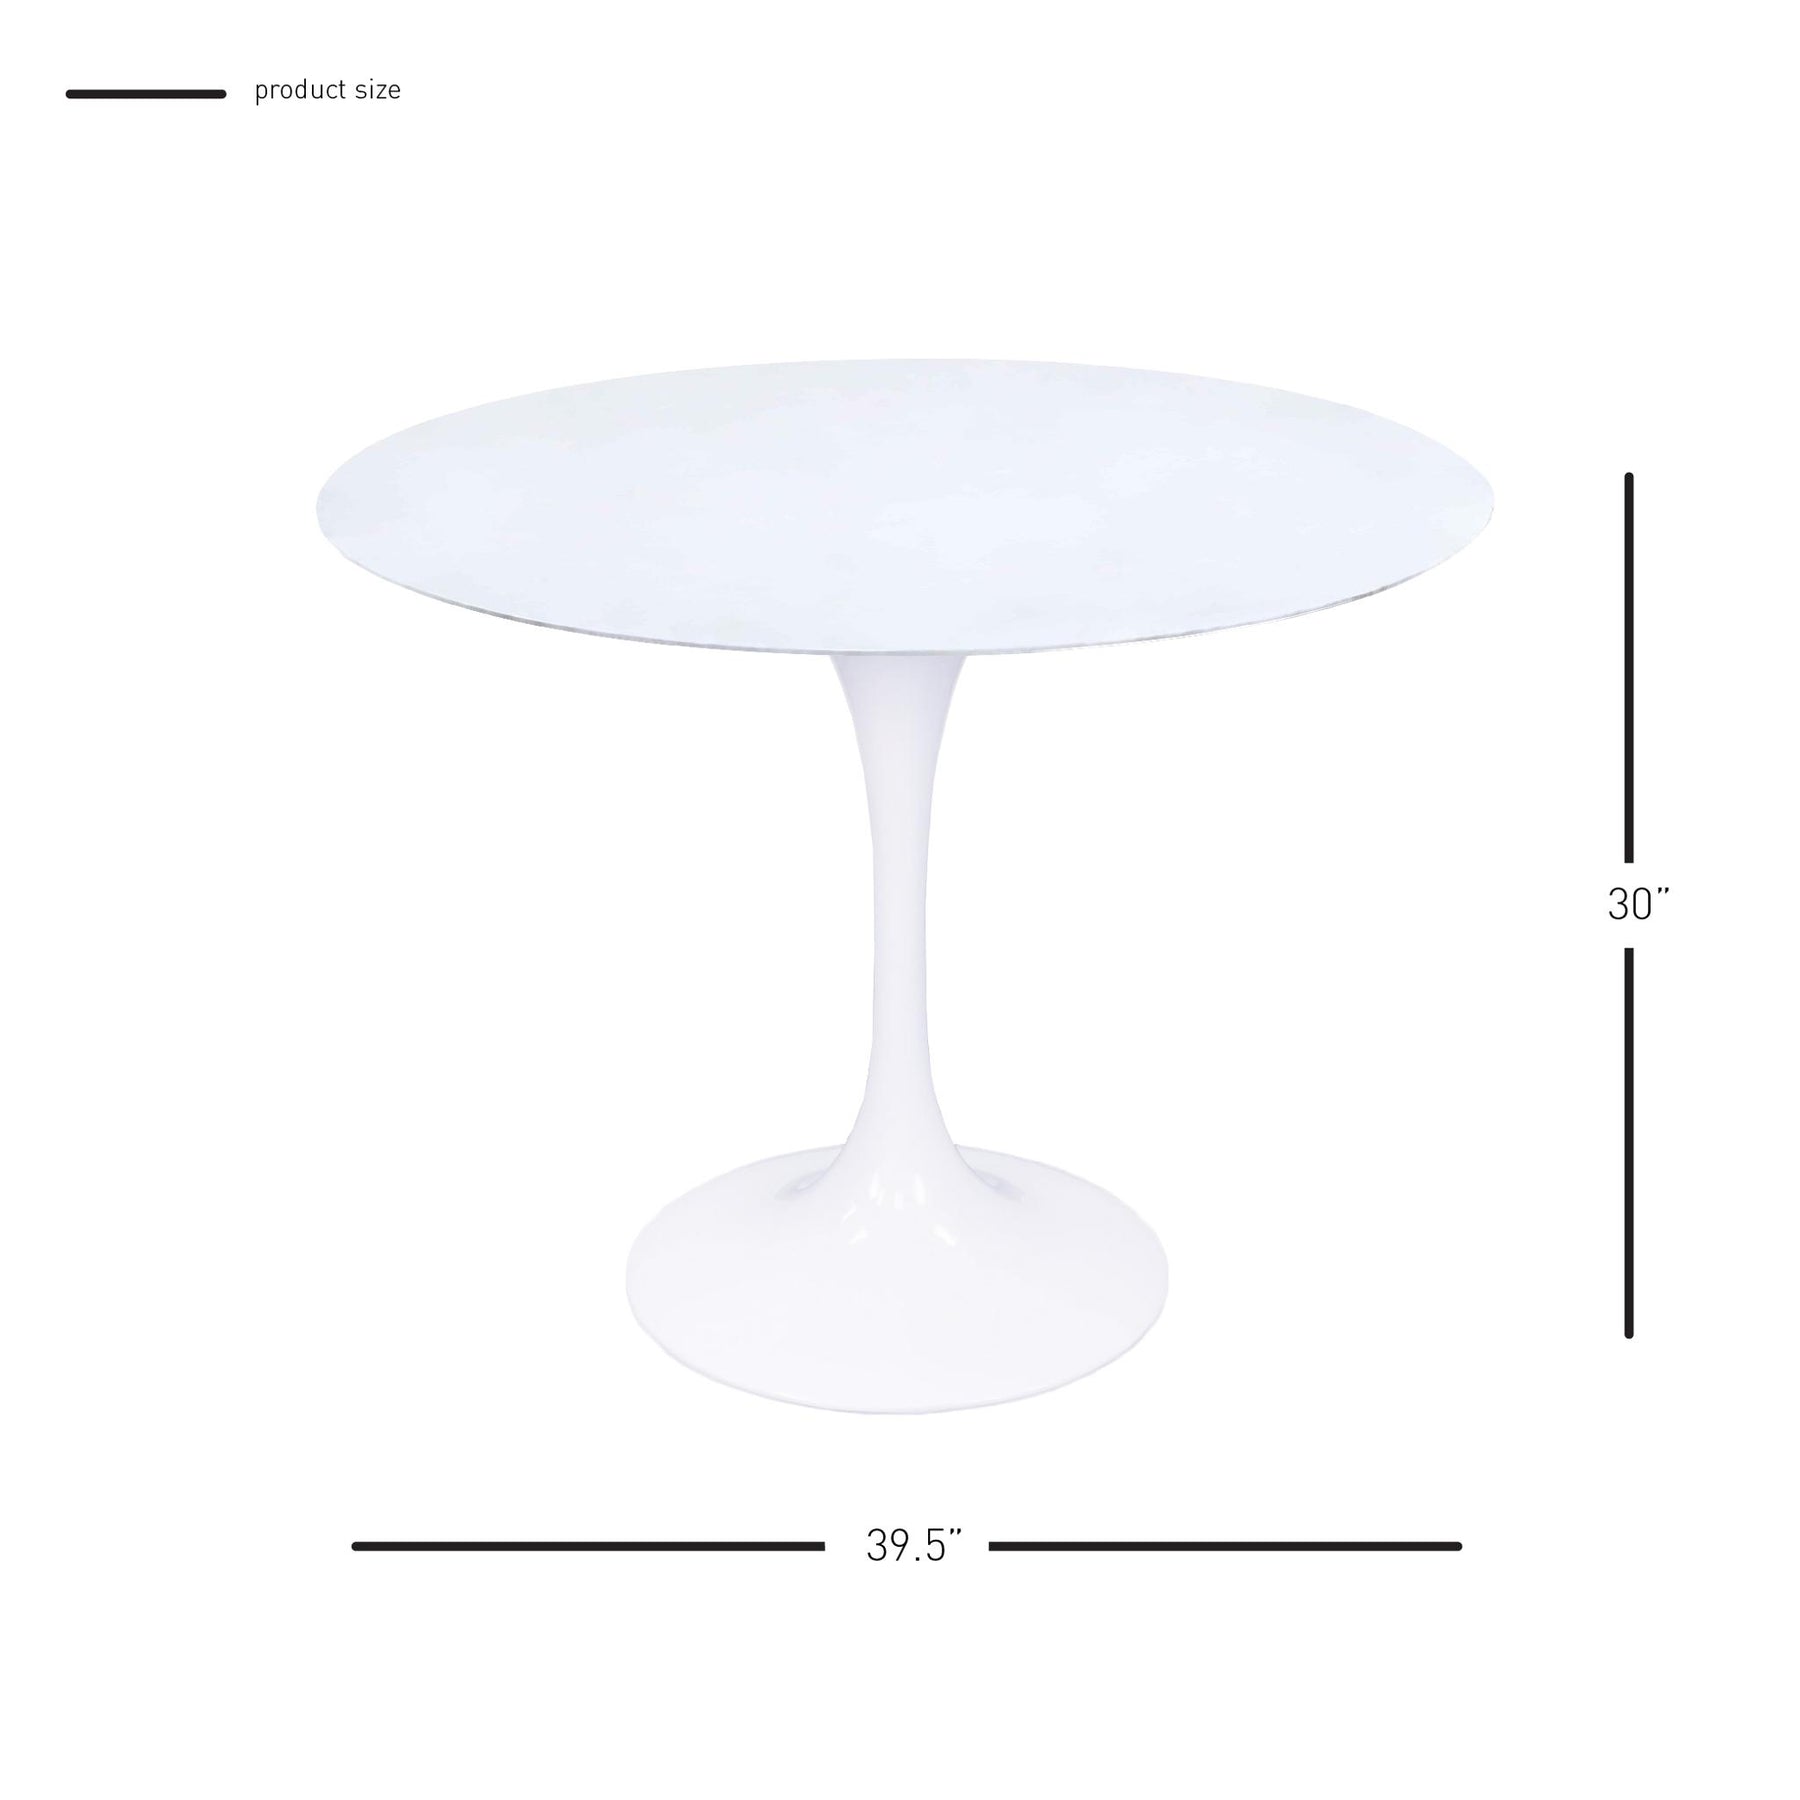 Allie 39" Round Table by New Pacific Direct - 6300003